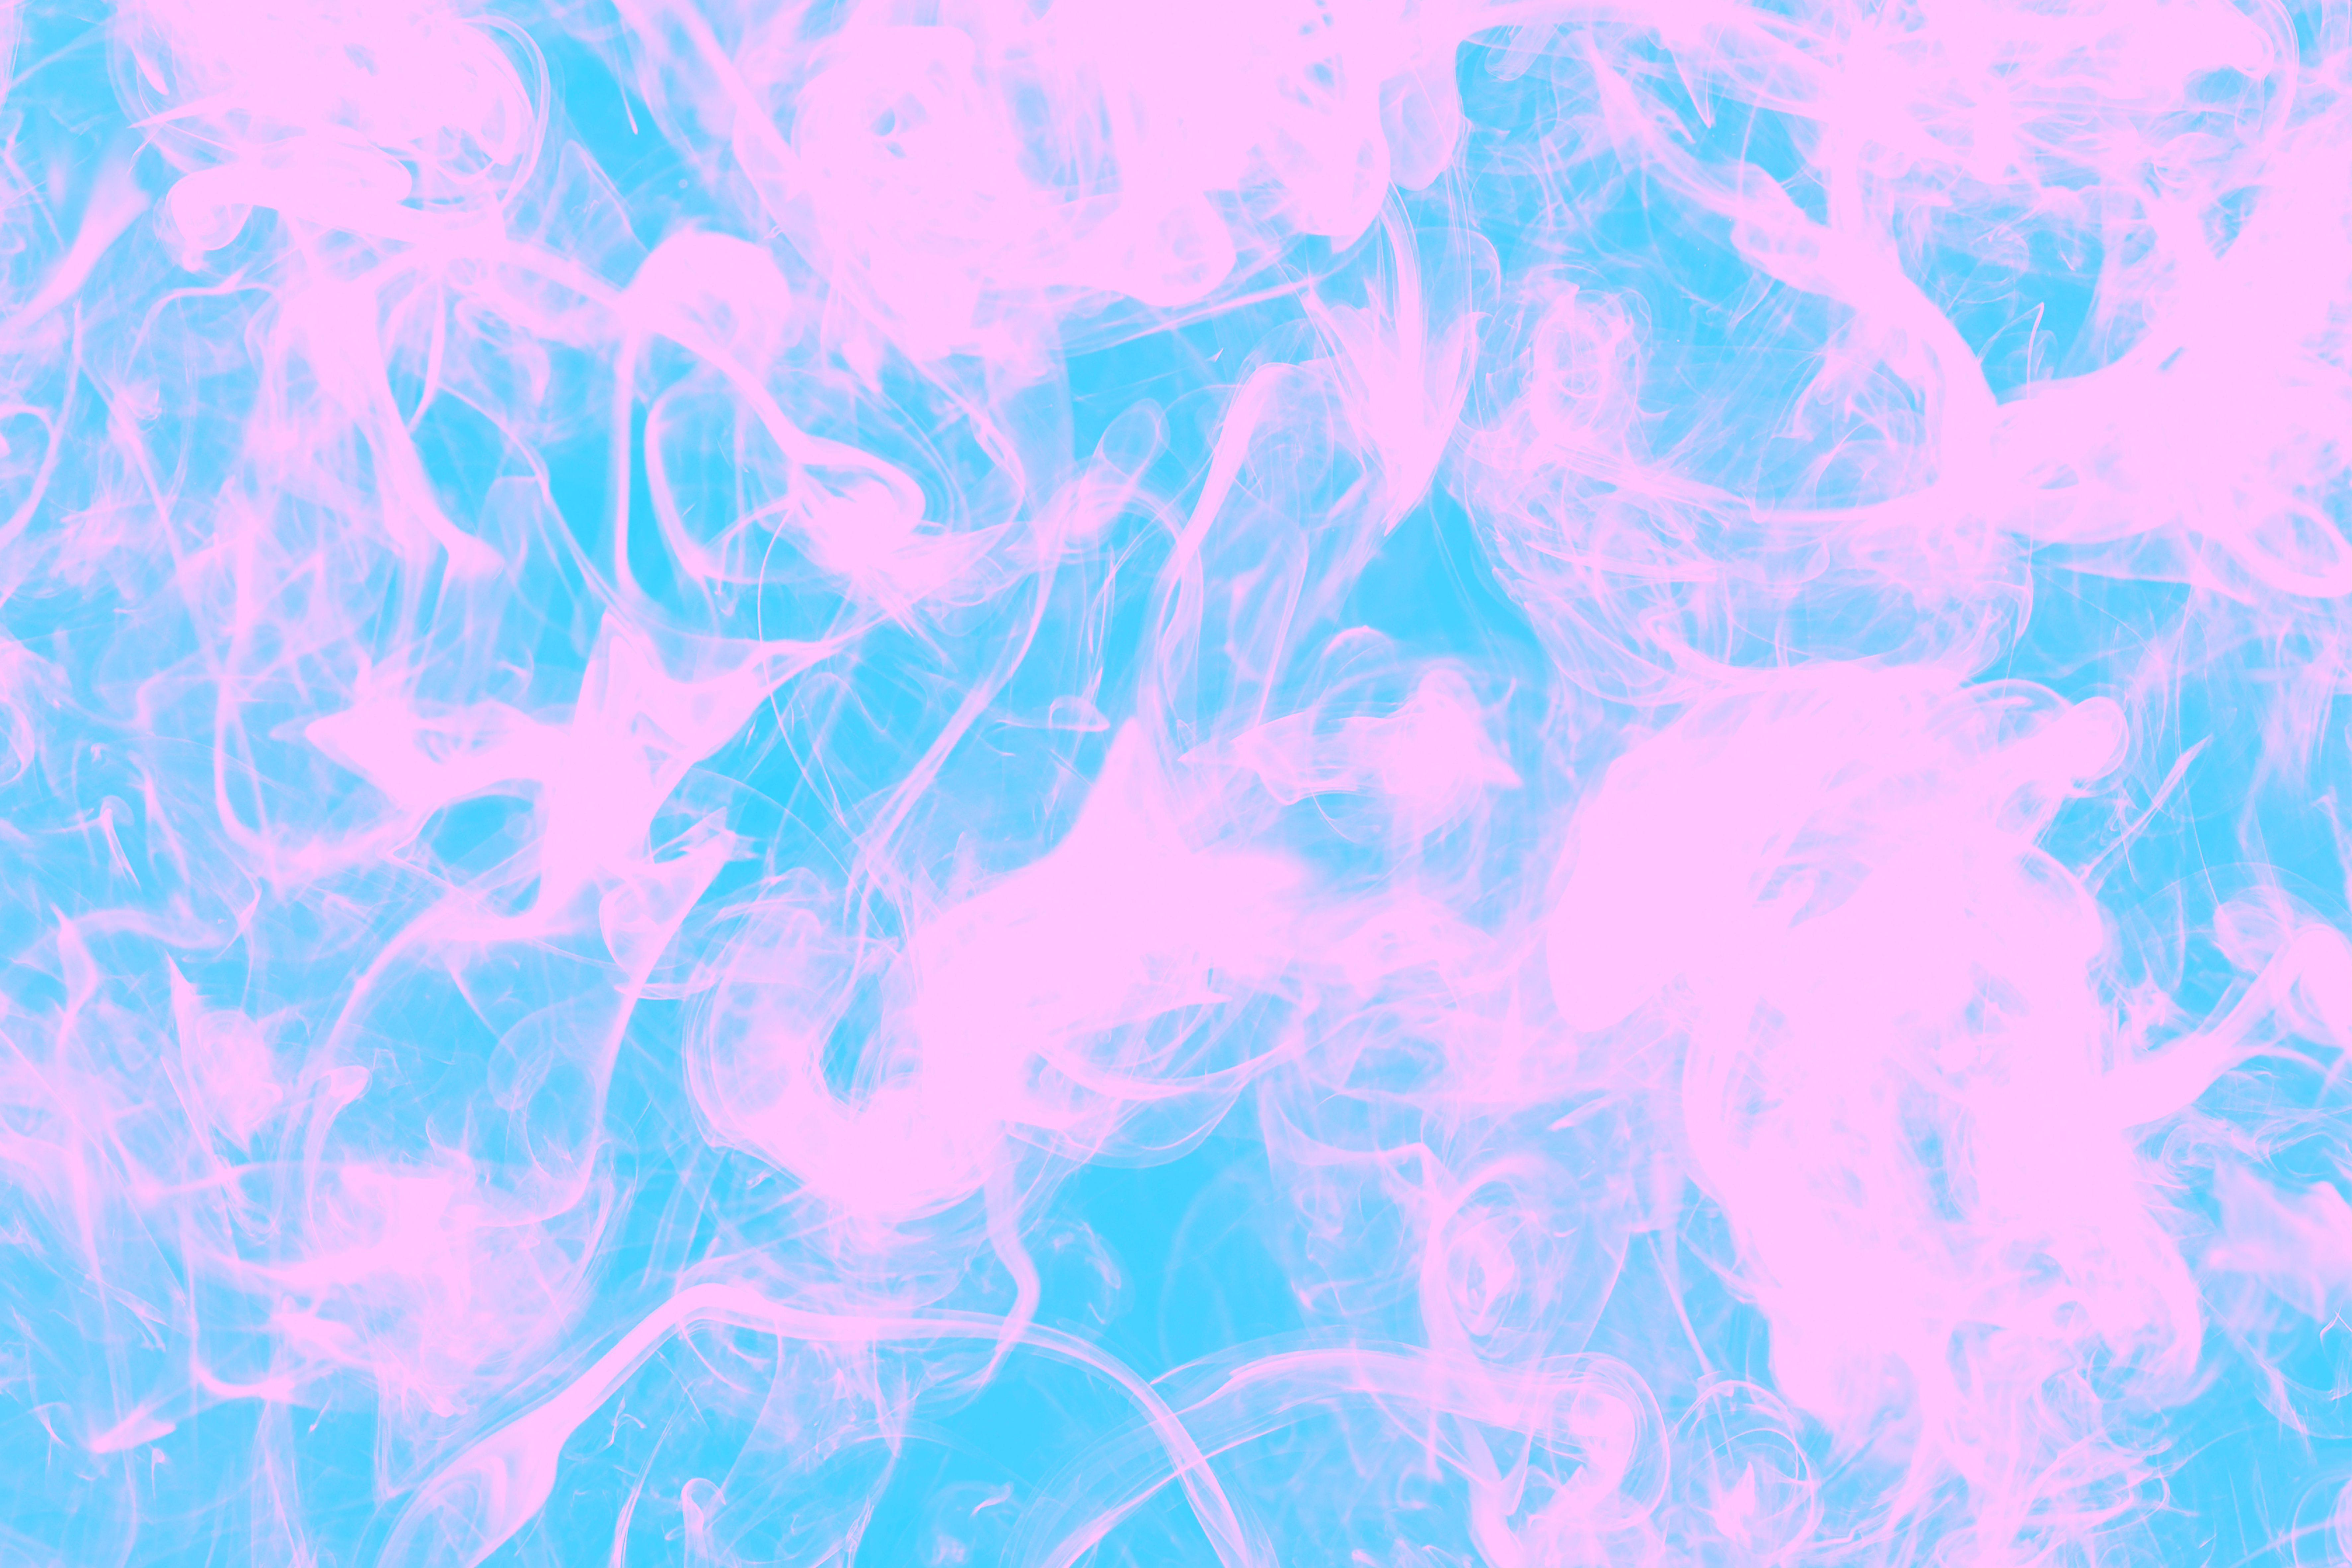 A pink and blue abstract painting - Photography, colorful, smoke, cool, art, profile picture, YouTube